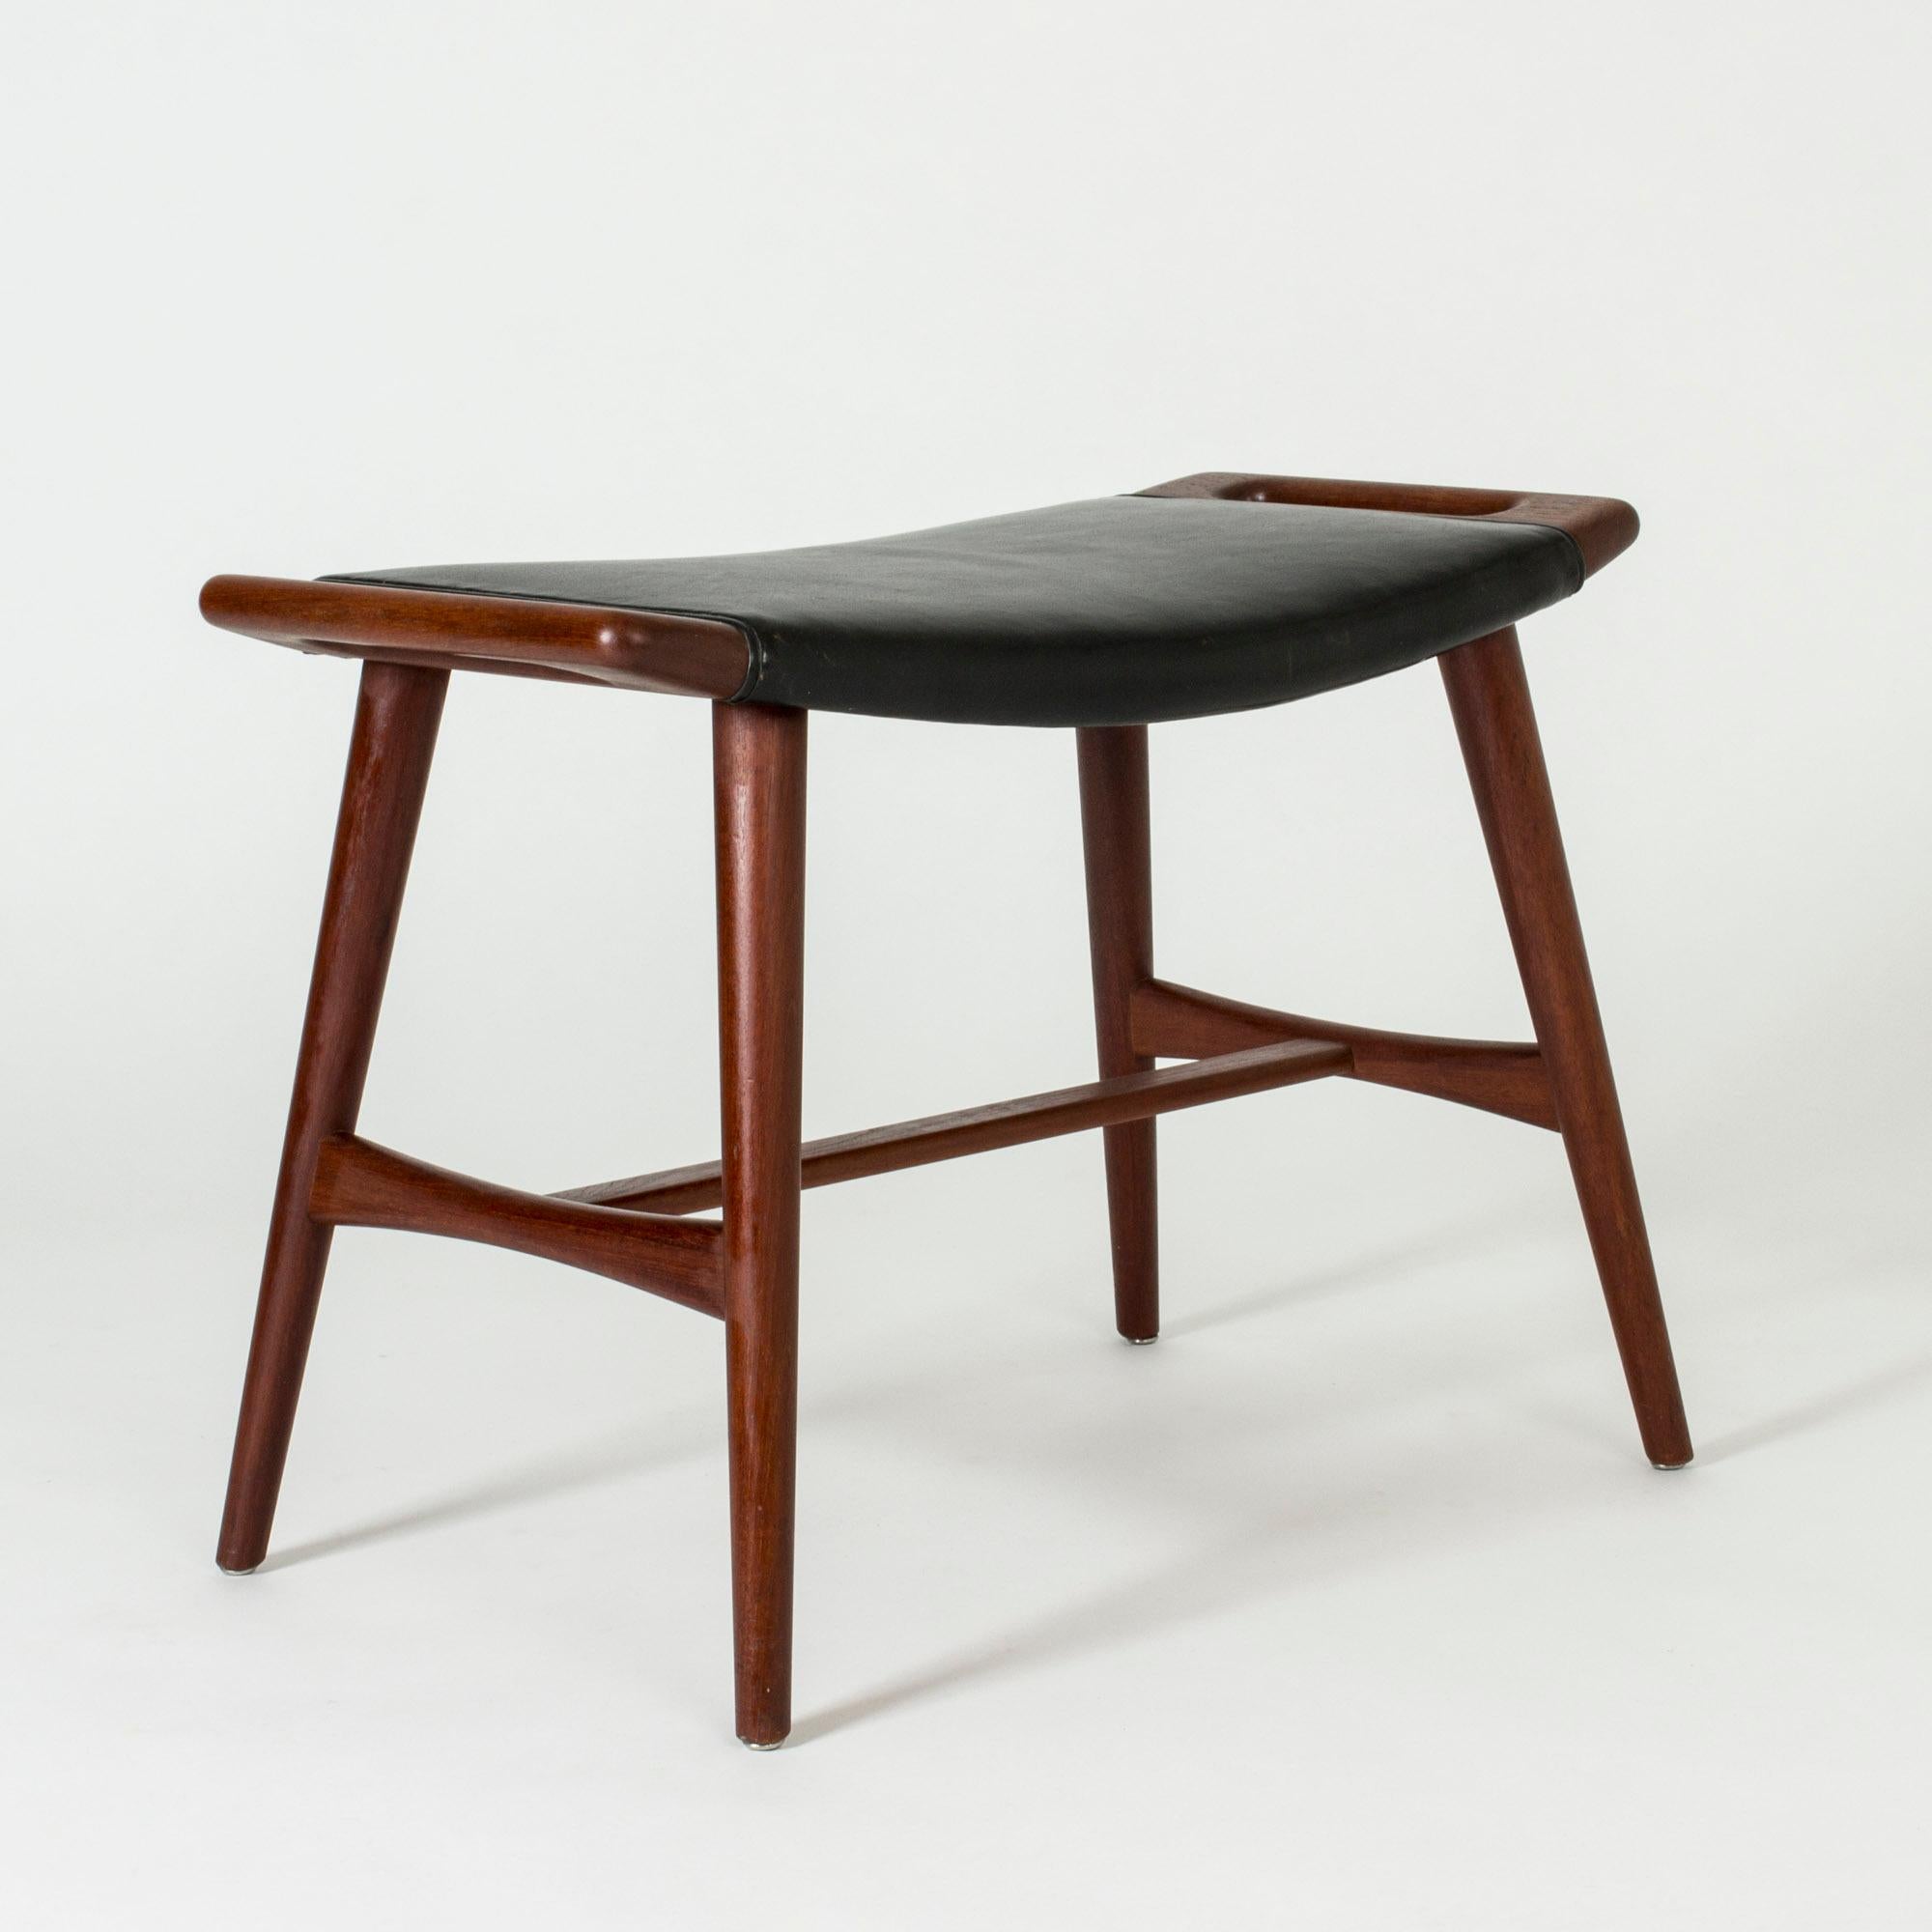 Rare piano stool by Hans J. Wegner, made from teak with original black leather upholstery. Beautiful sculpted handles on the sides of the seat, great condition.